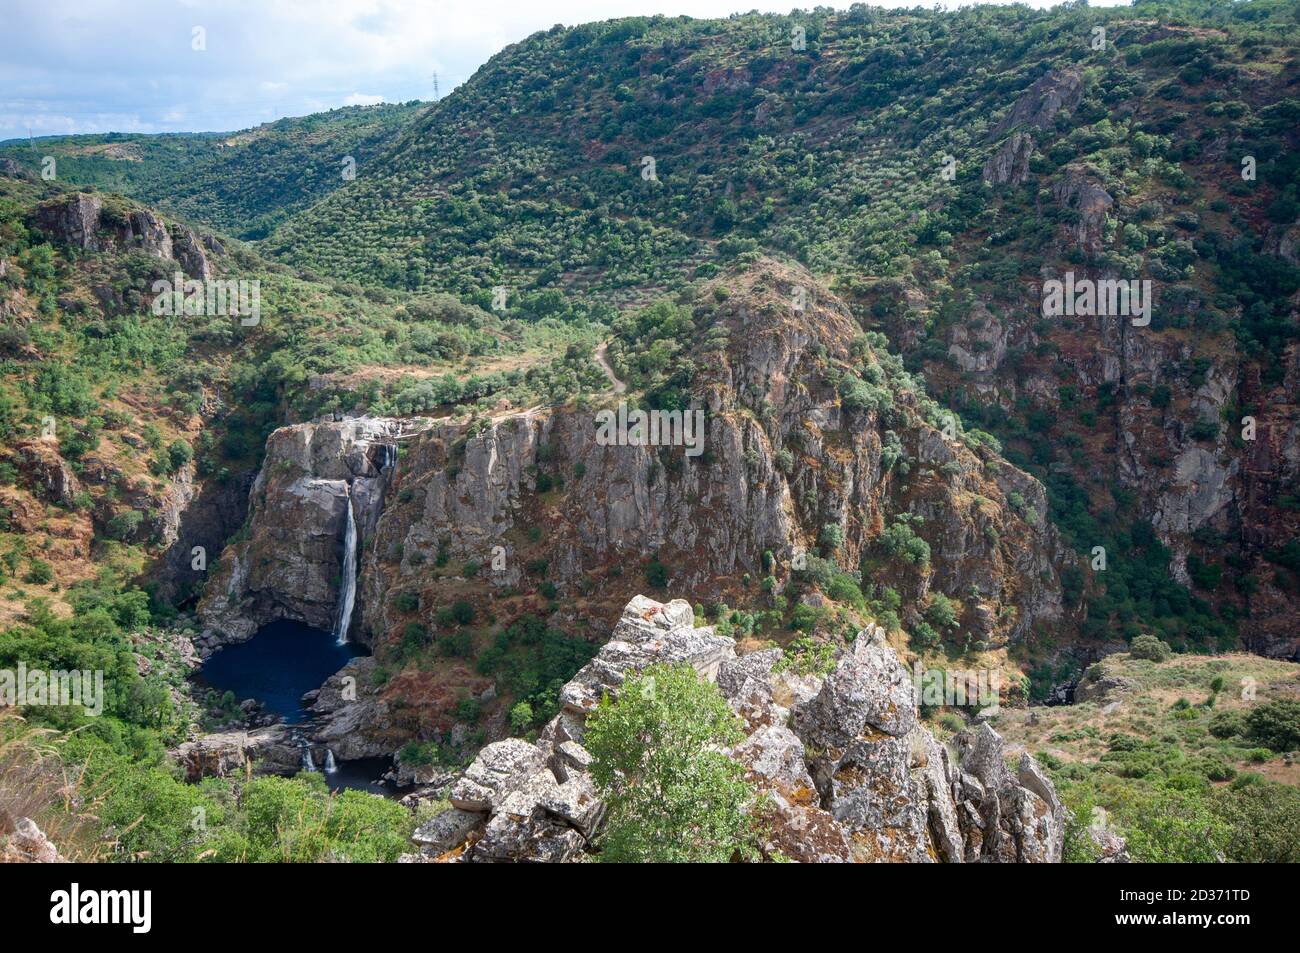 Landscape of Los Arribes del Duero, Spain. The river makes border between Spain and Portugal. Stock Photo